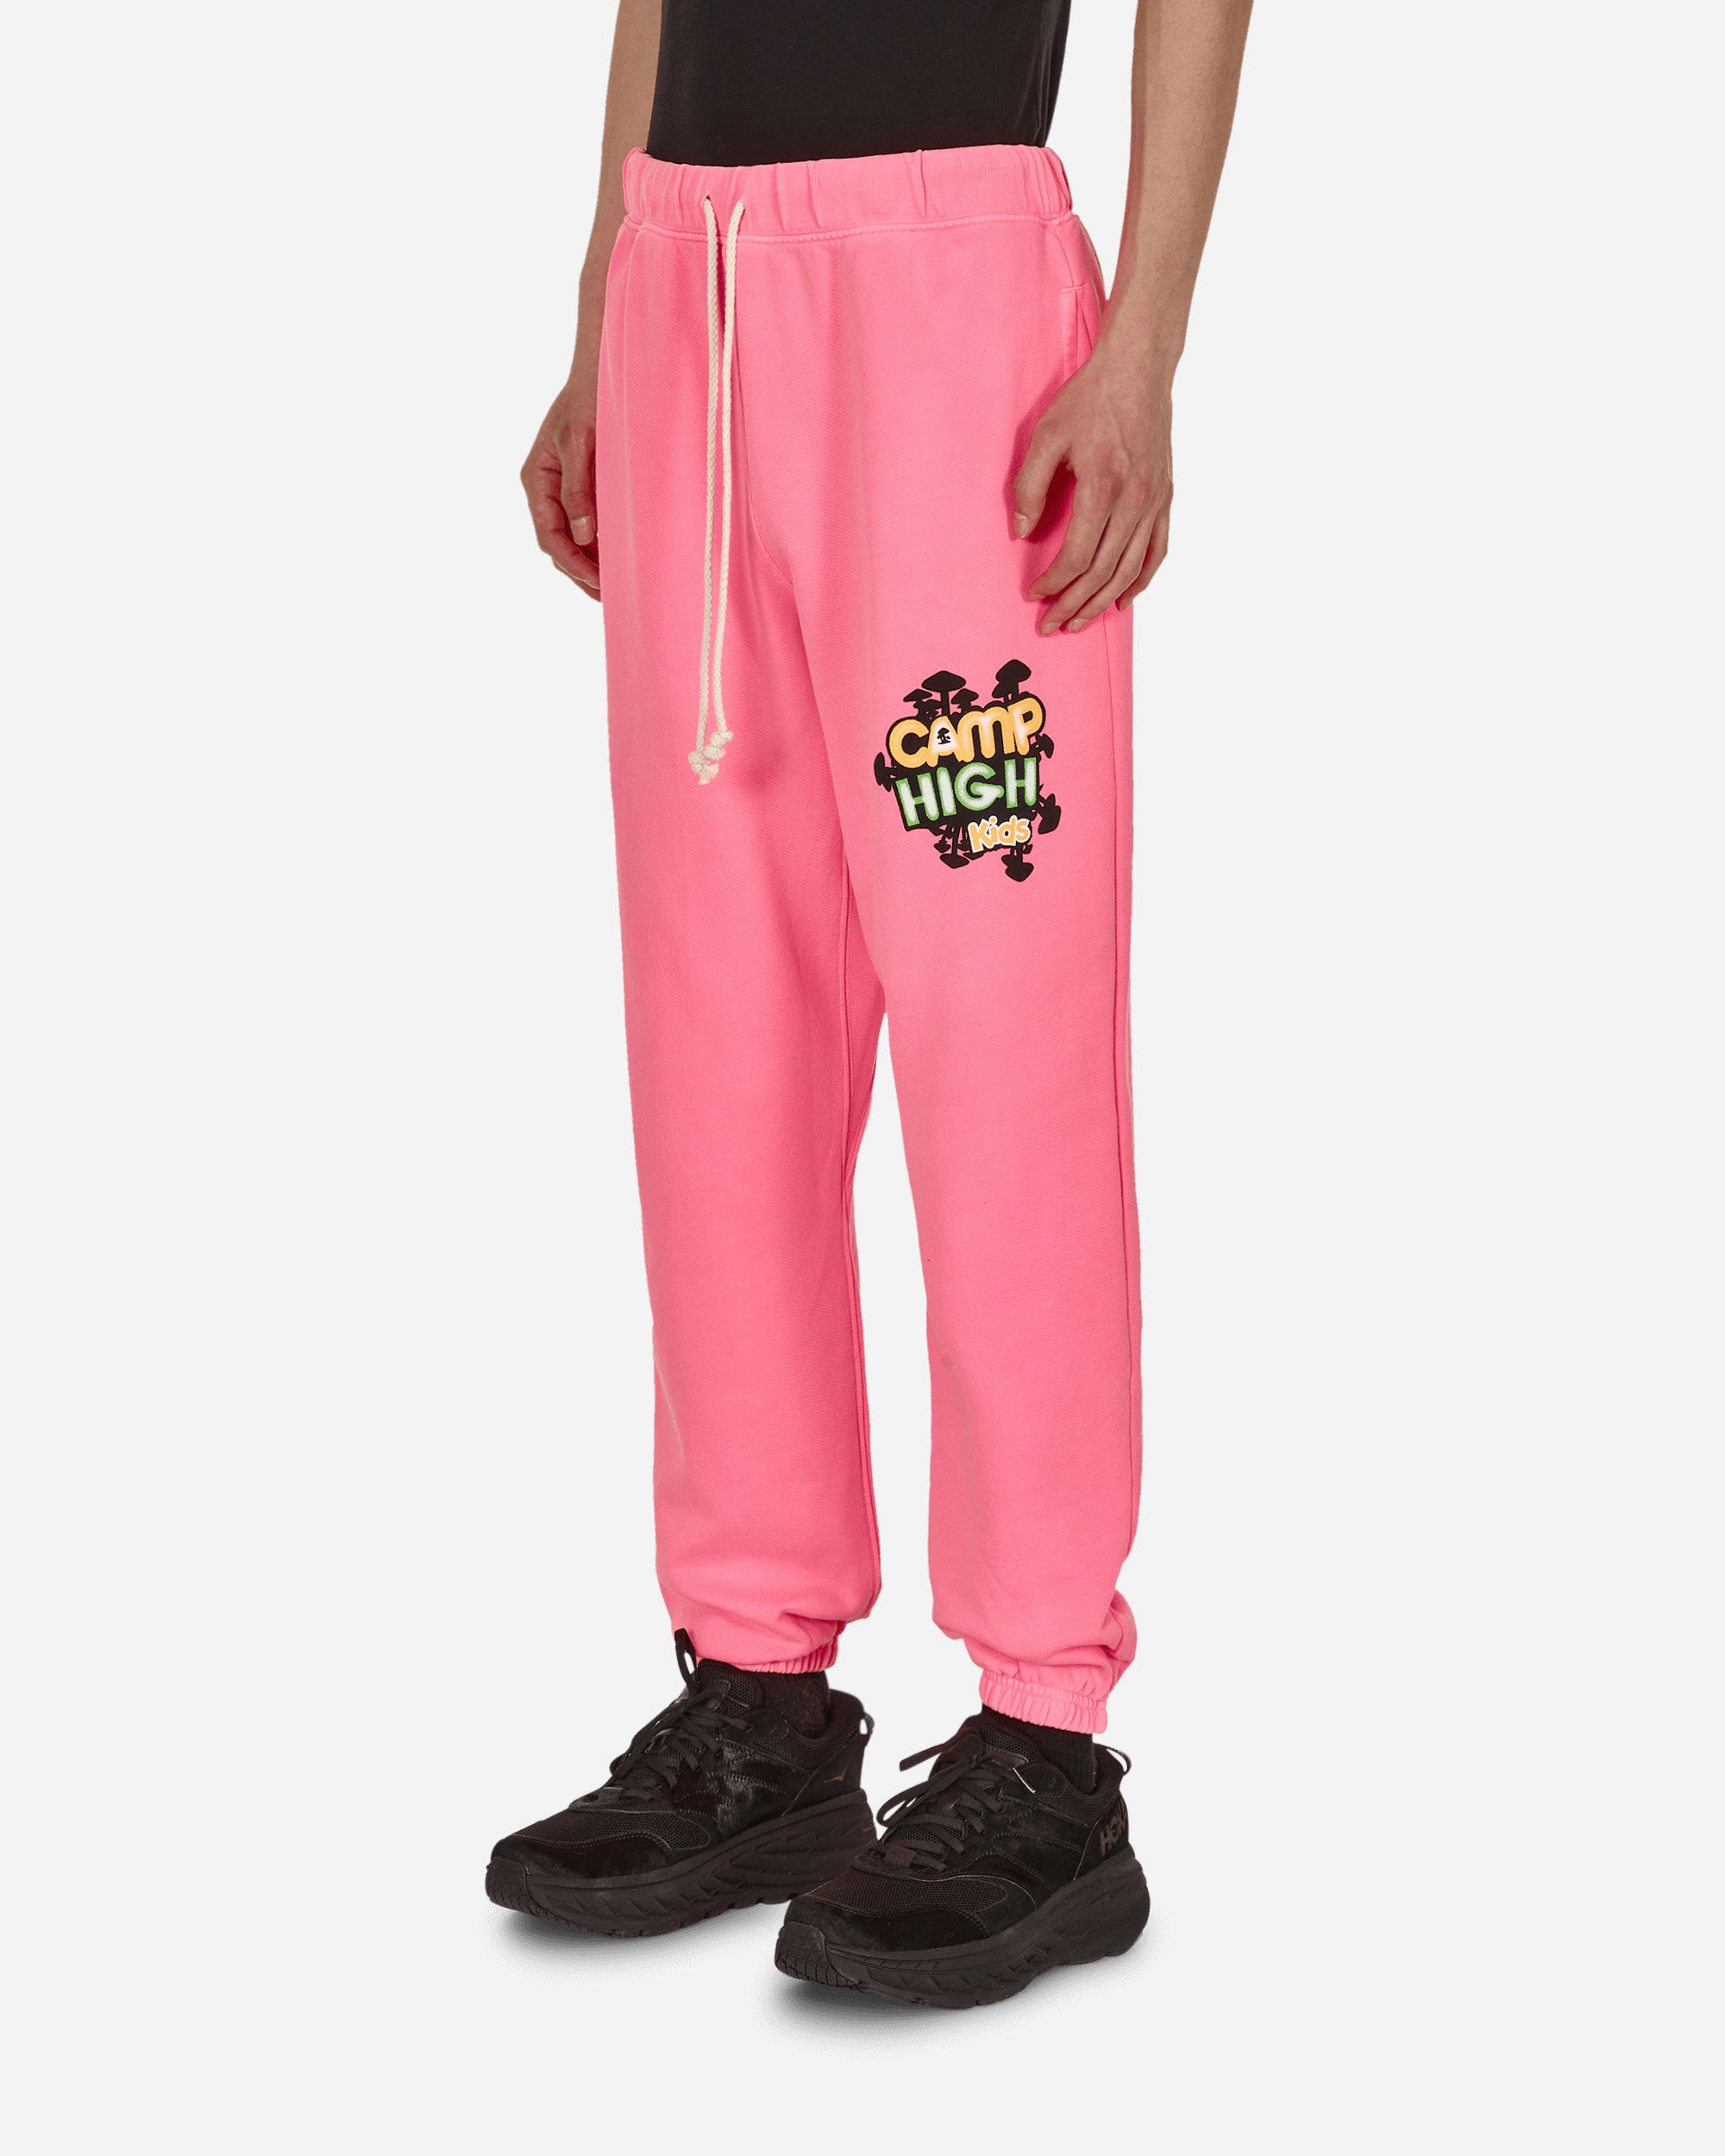 Camp High Camp High Kids Perfect Pink Pants Trousers CHKIDSPANTS PERFECTPINK